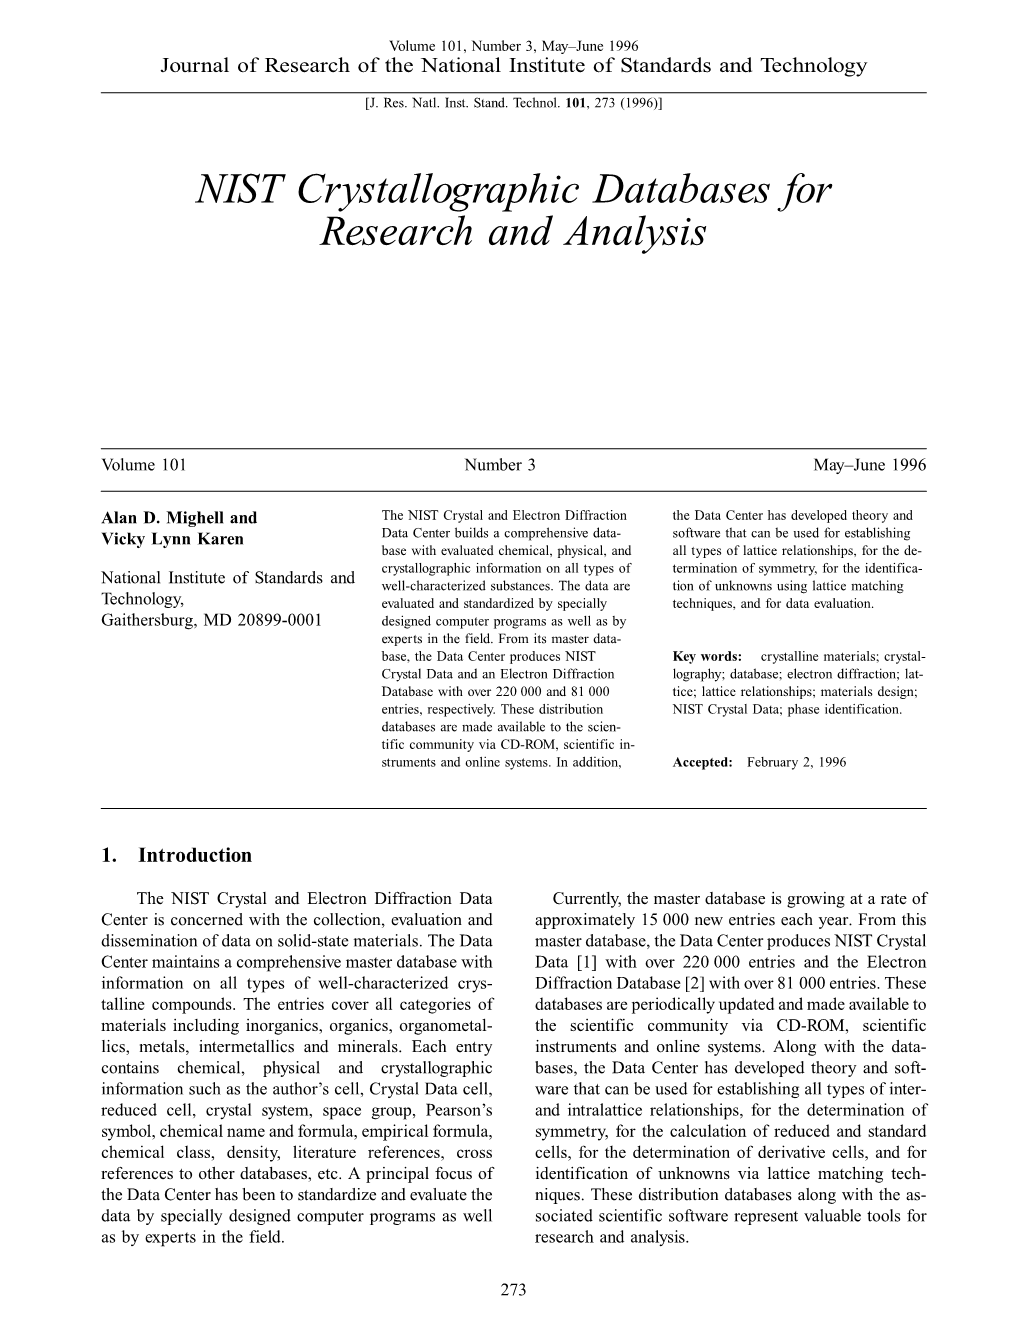 NIST Crystallographic Databases for Research and Analysis